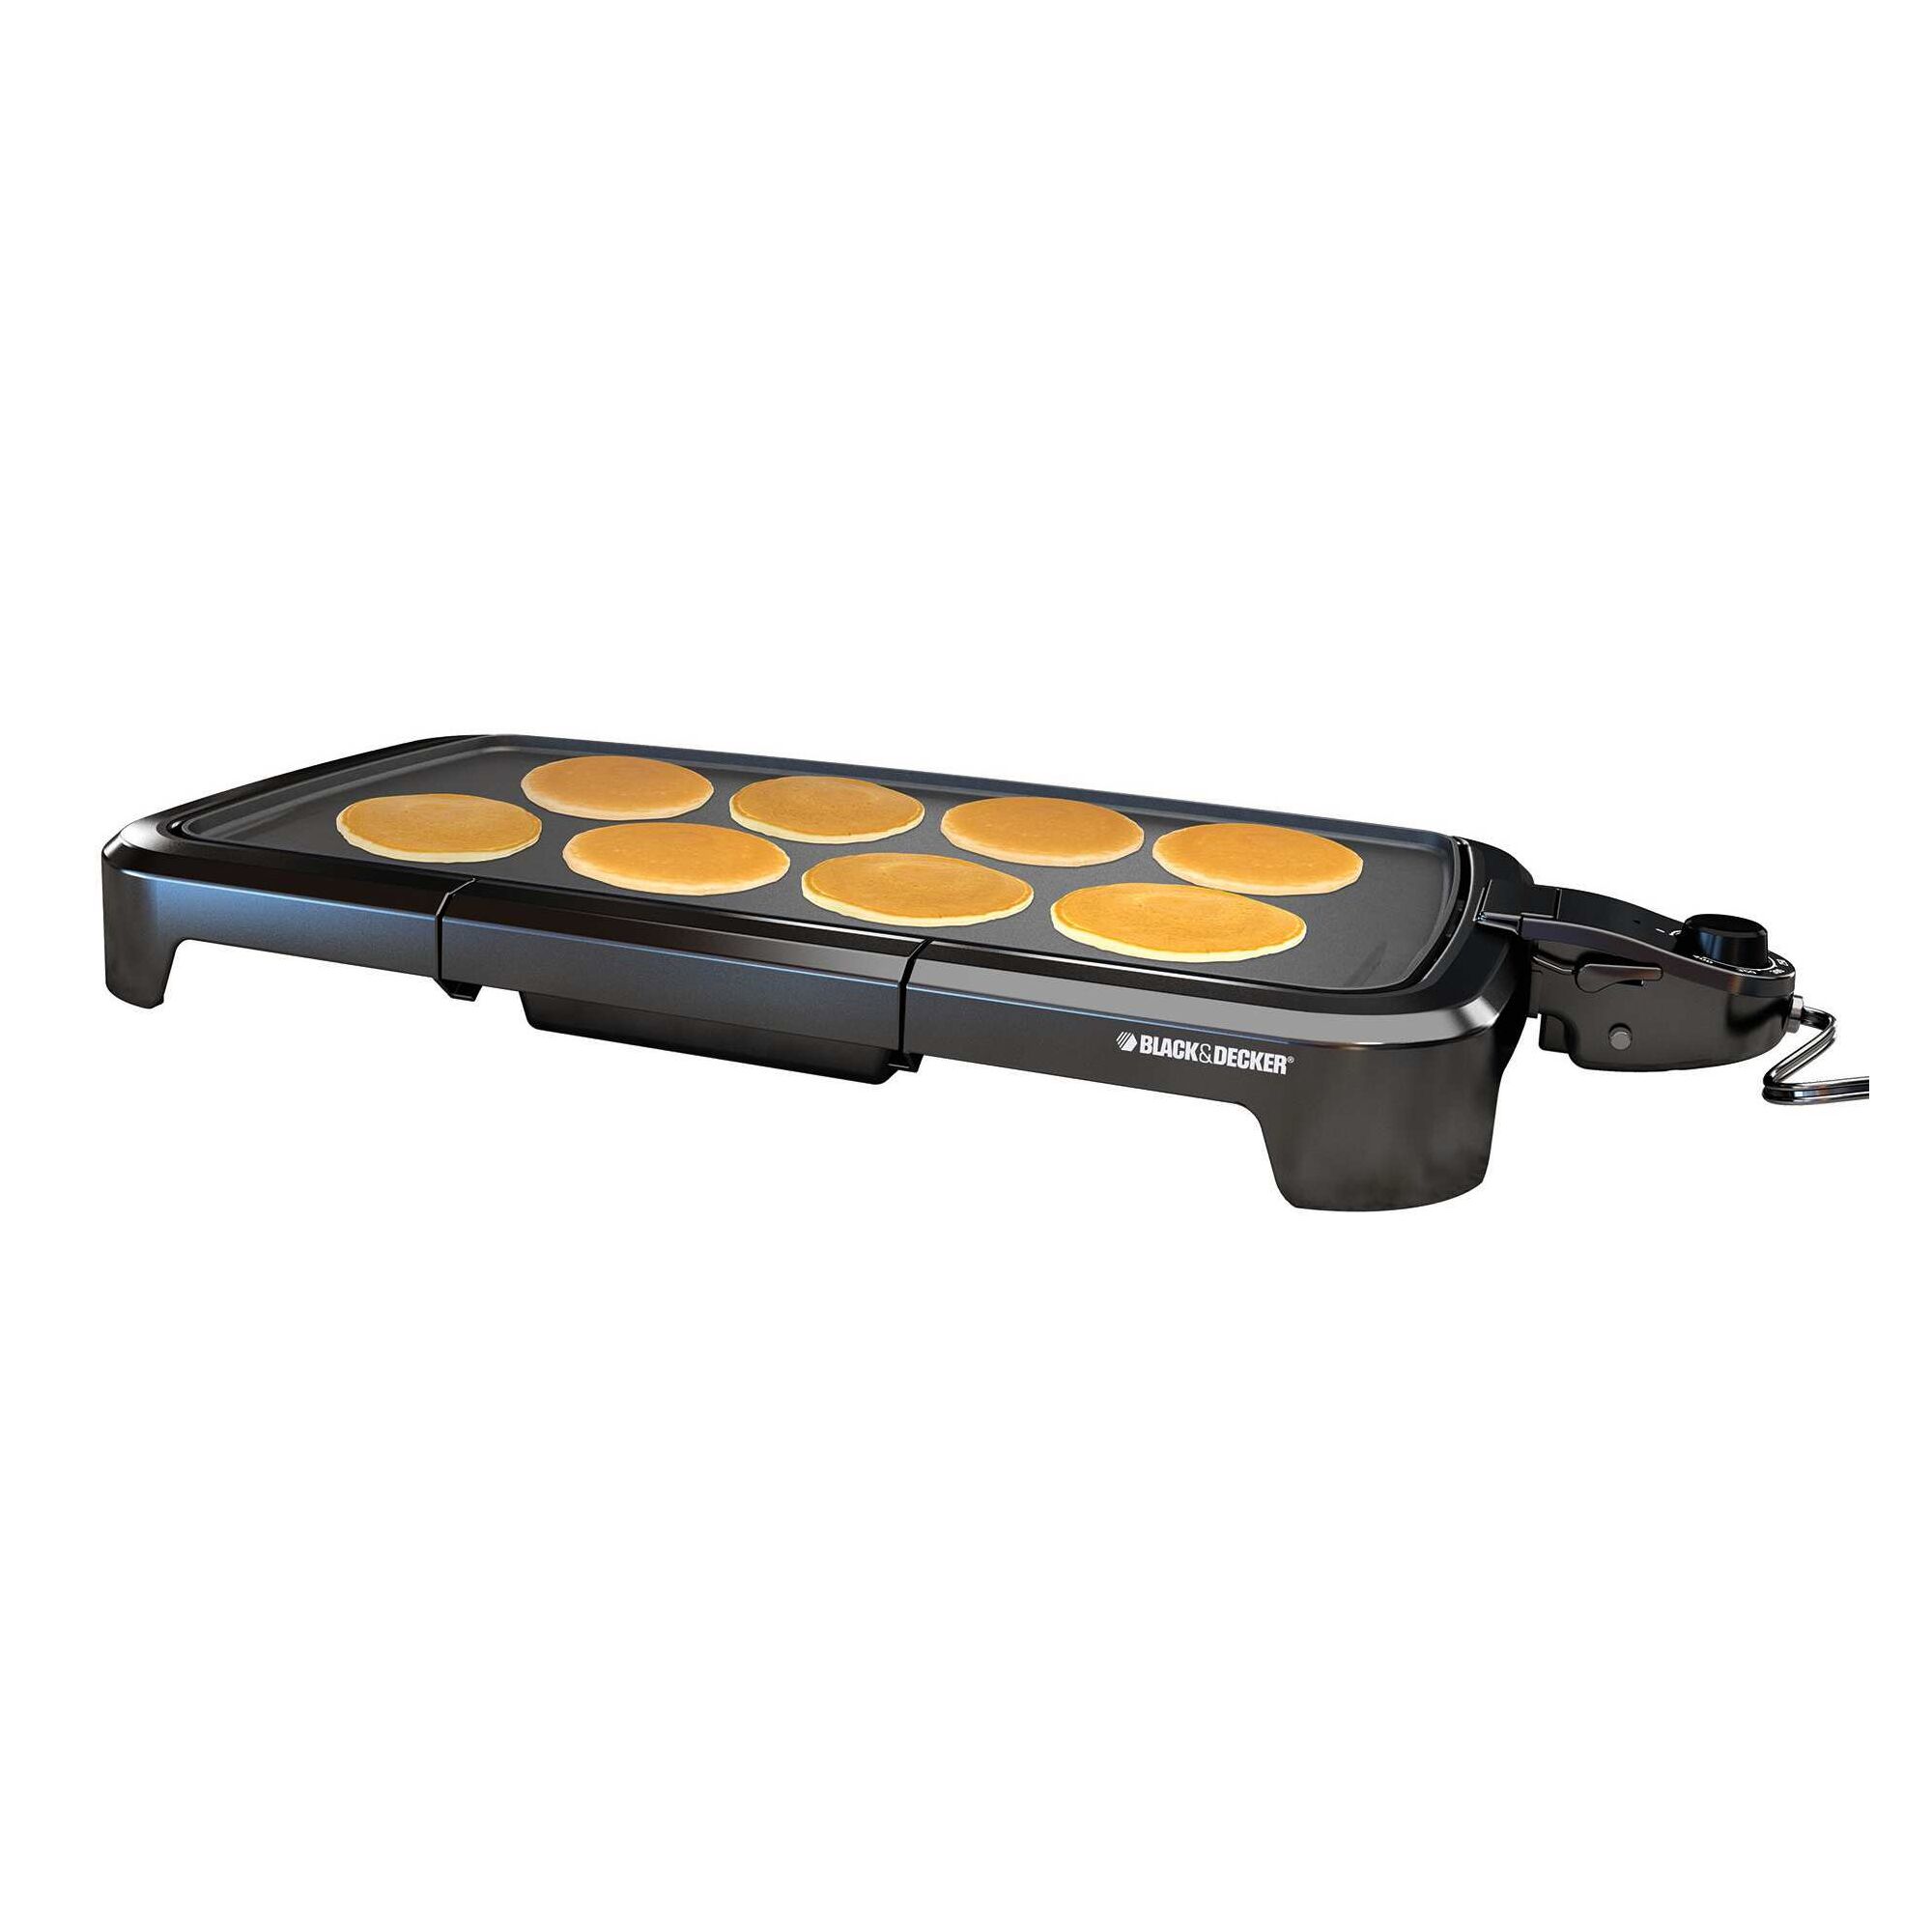 Family size electric griddle with pancakes.